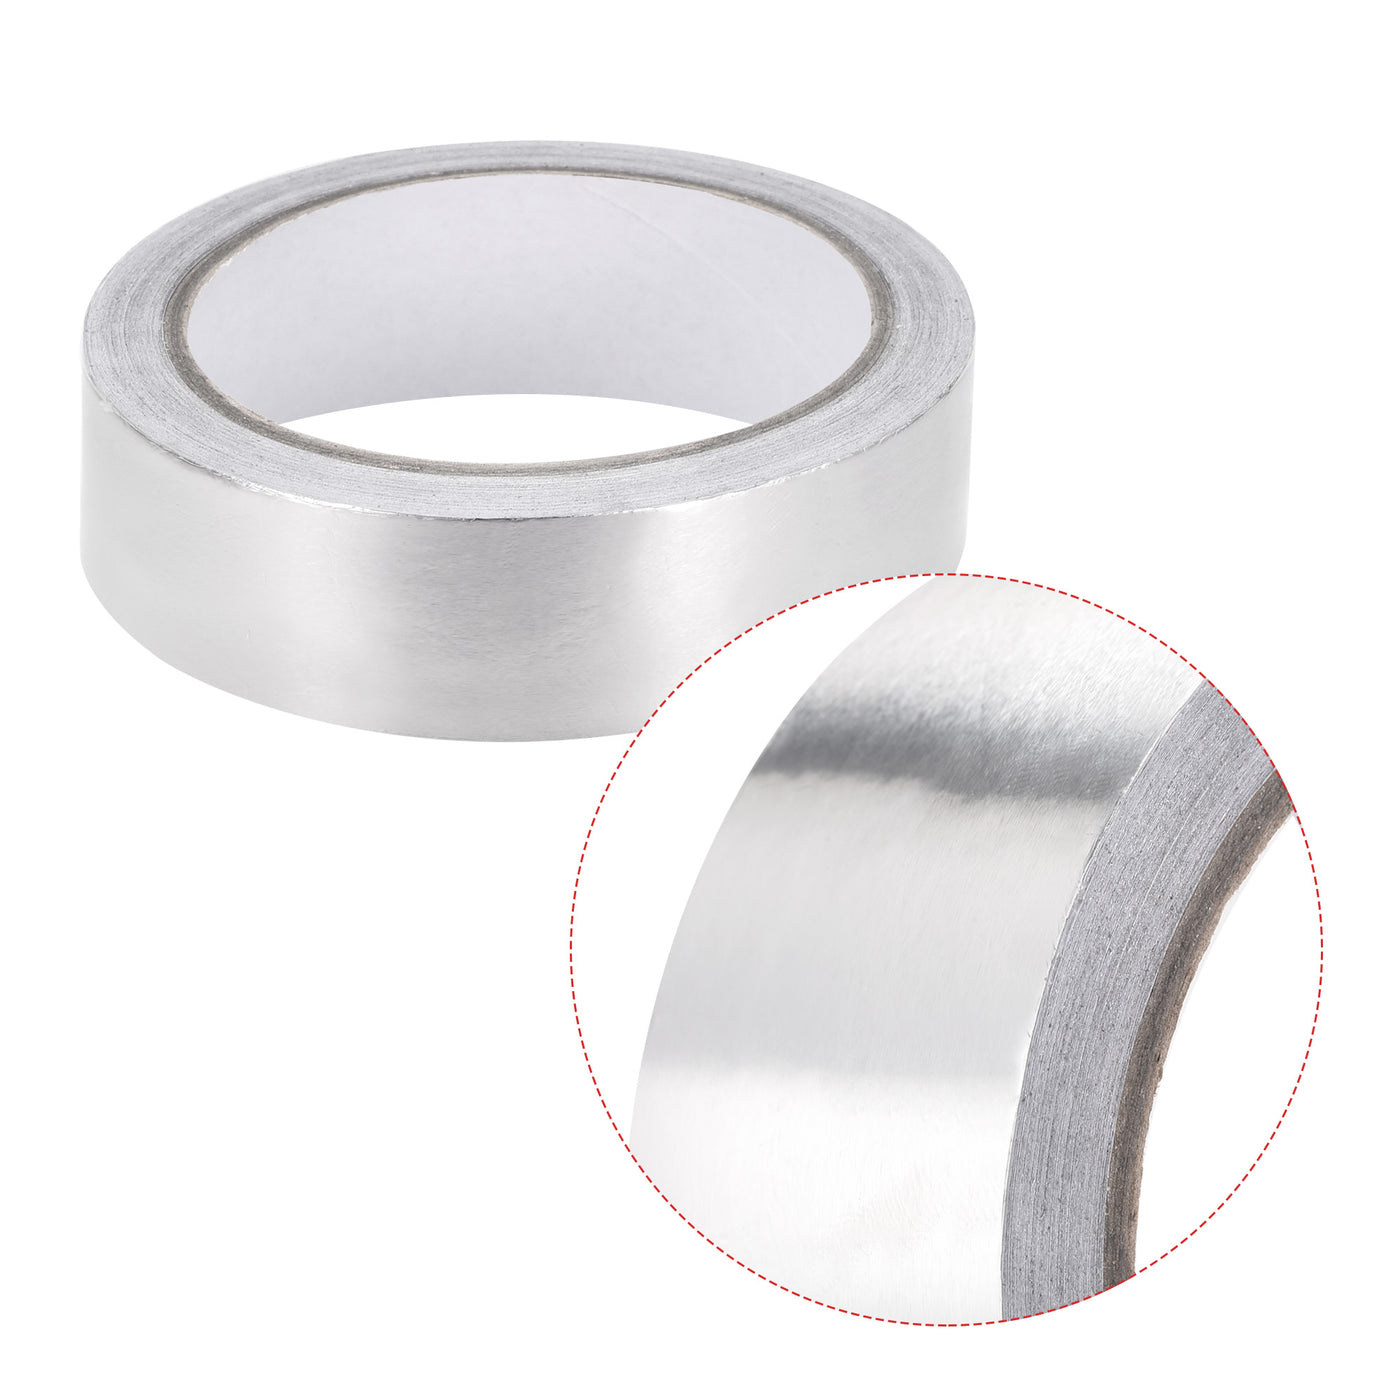 uxcell Uxcell 20mm Aluminum Foil Tape High Temperature Tape for HVAC, Sealing, Patching Hot and Cold Air Ducts Single Sided Adhesive Tape 20m/65ft